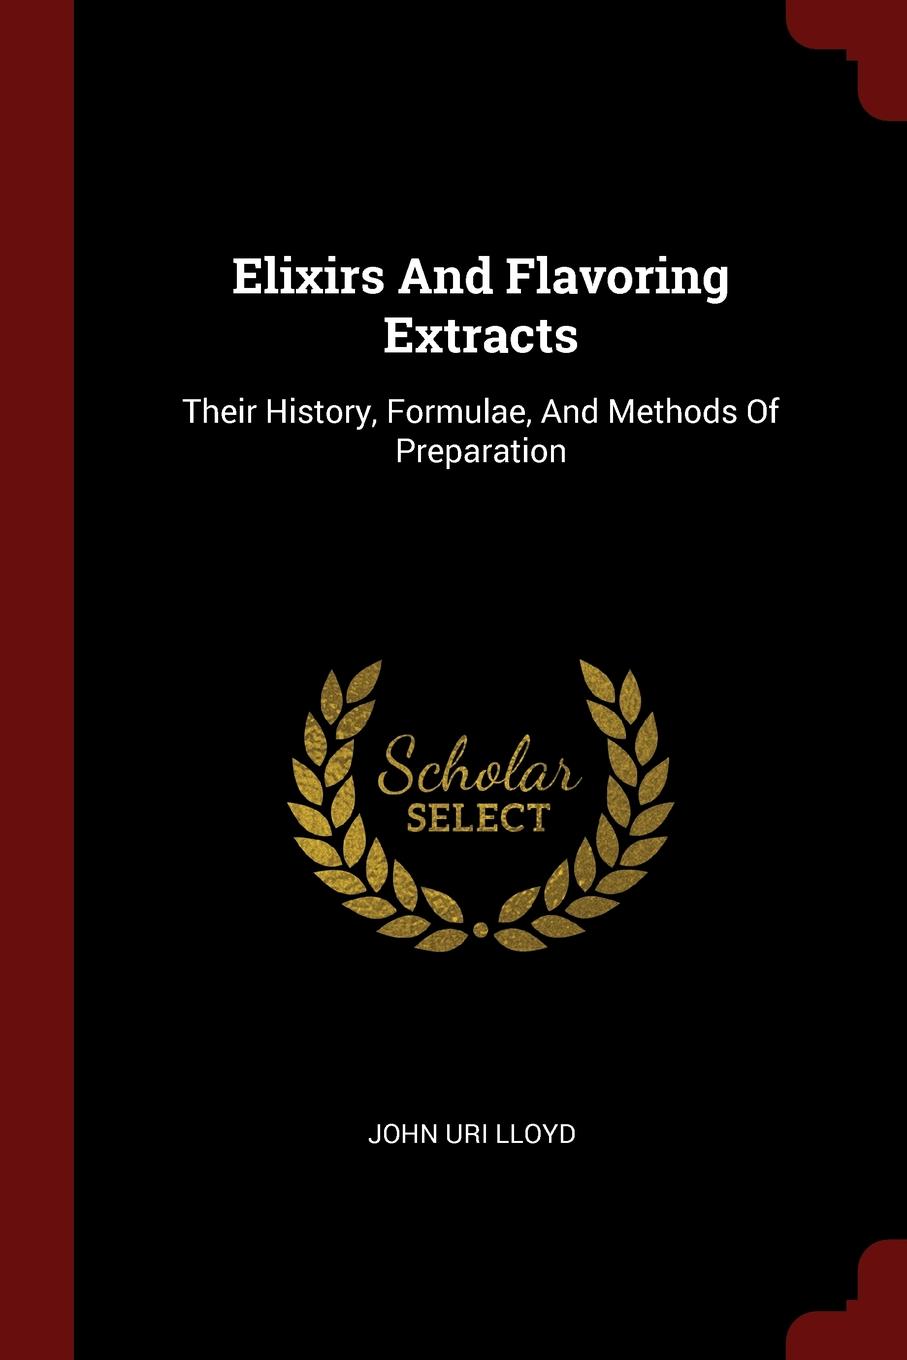 Elixirs And Flavoring Extracts. Their History, Formulae, And Methods Of Preparation